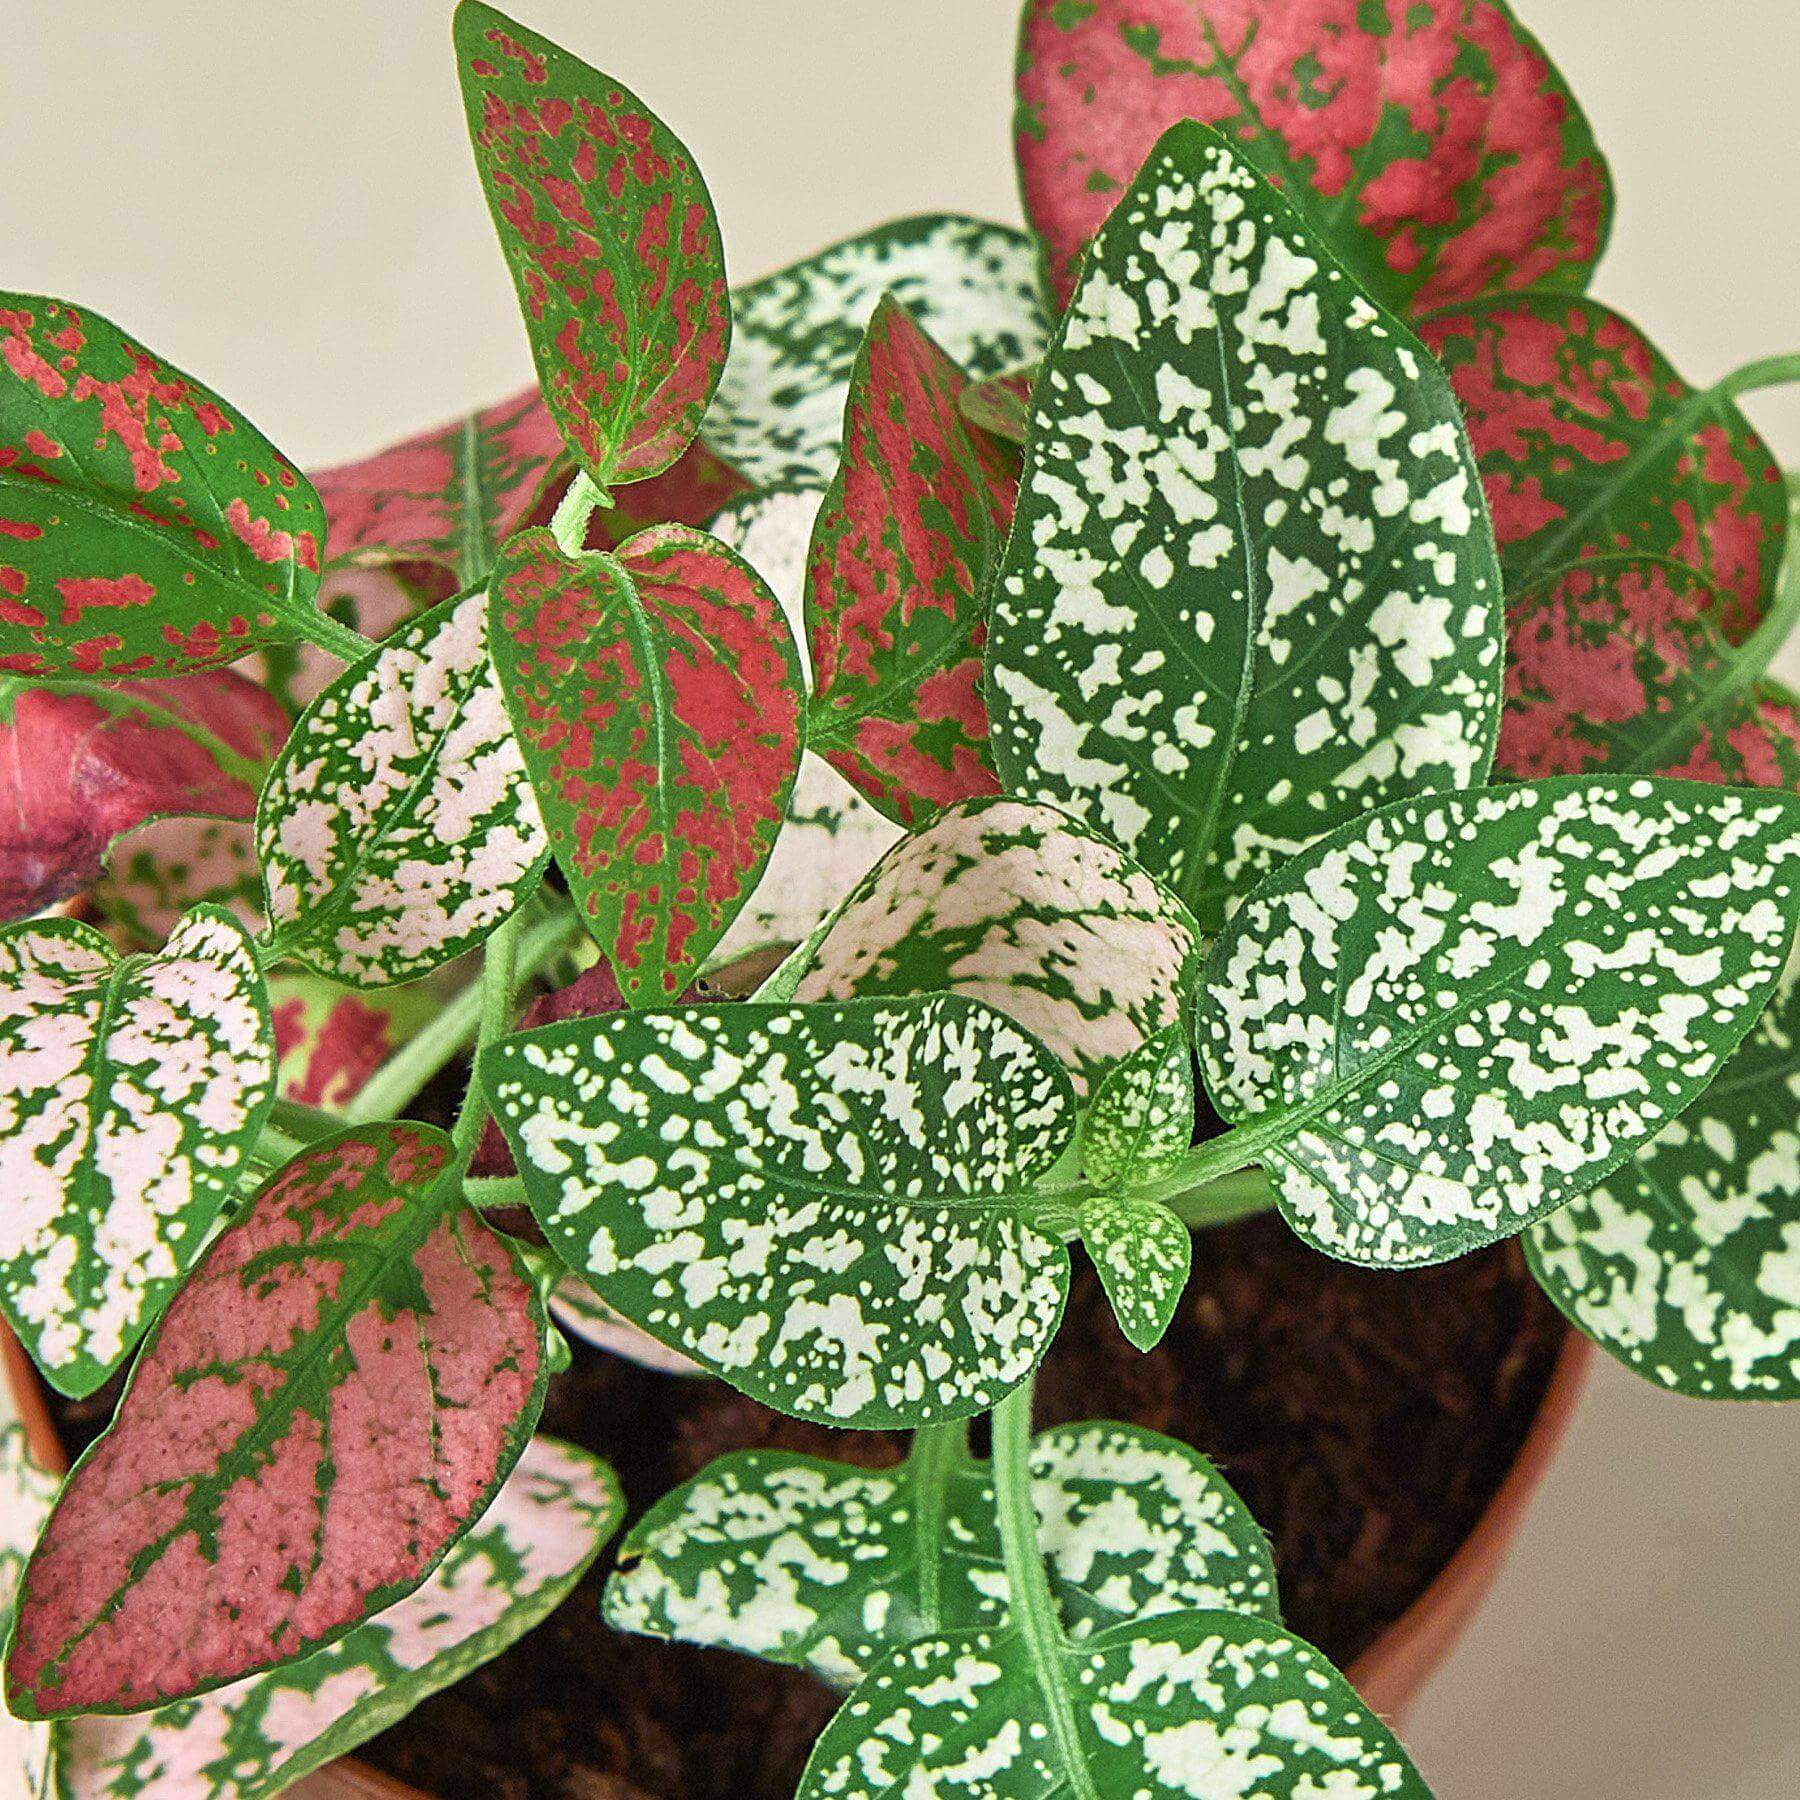 Hypoestes White and Red - Polka Dot plant | Modern house plants that clean the air